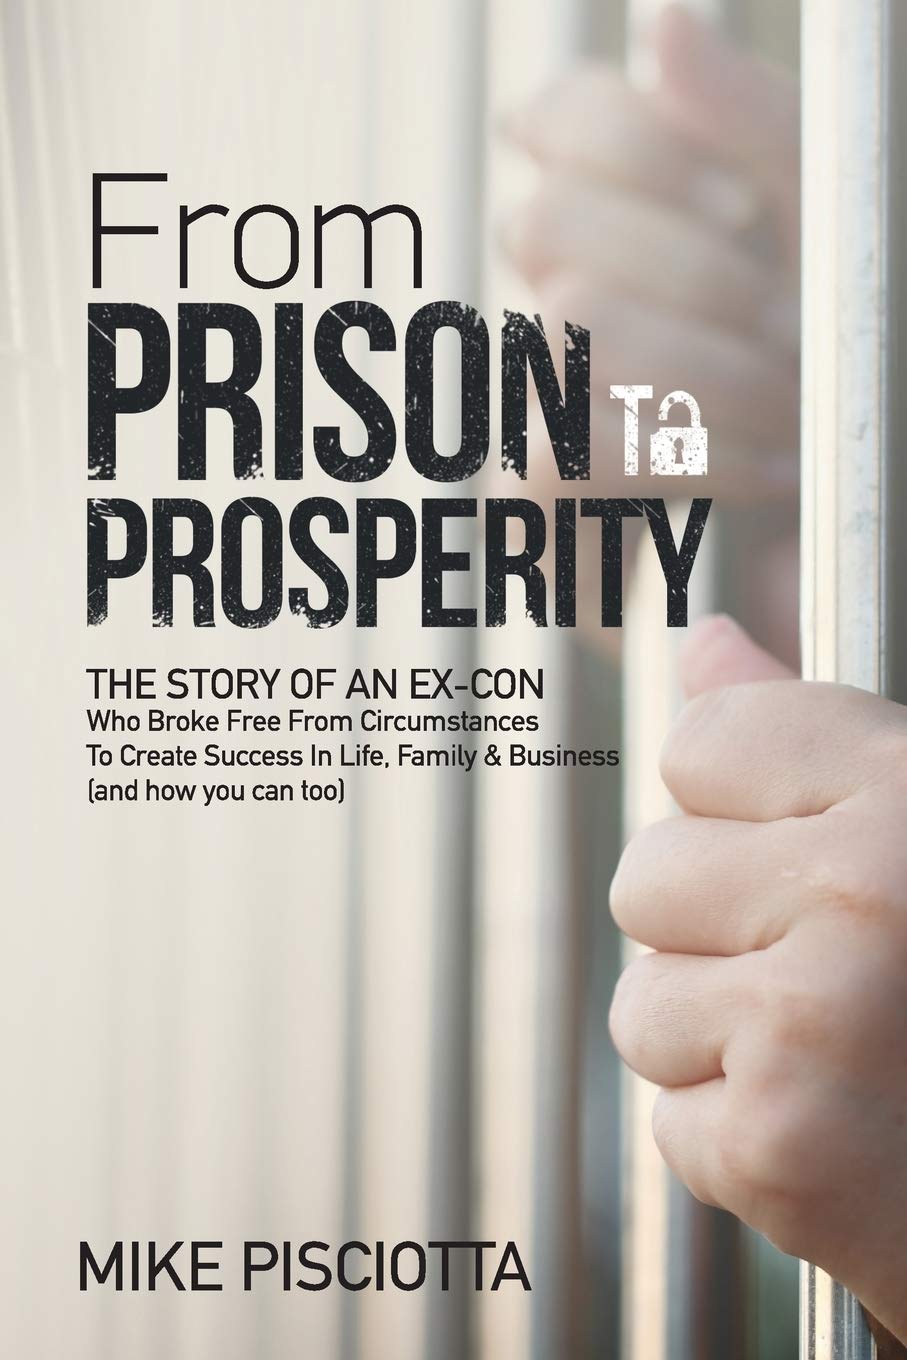 From Prison to Prosperity: The Story of an Ex-Con Who Broke Free from Circumstances to Create Success in Life, Family & Business - SureShot Books Publishing LLC